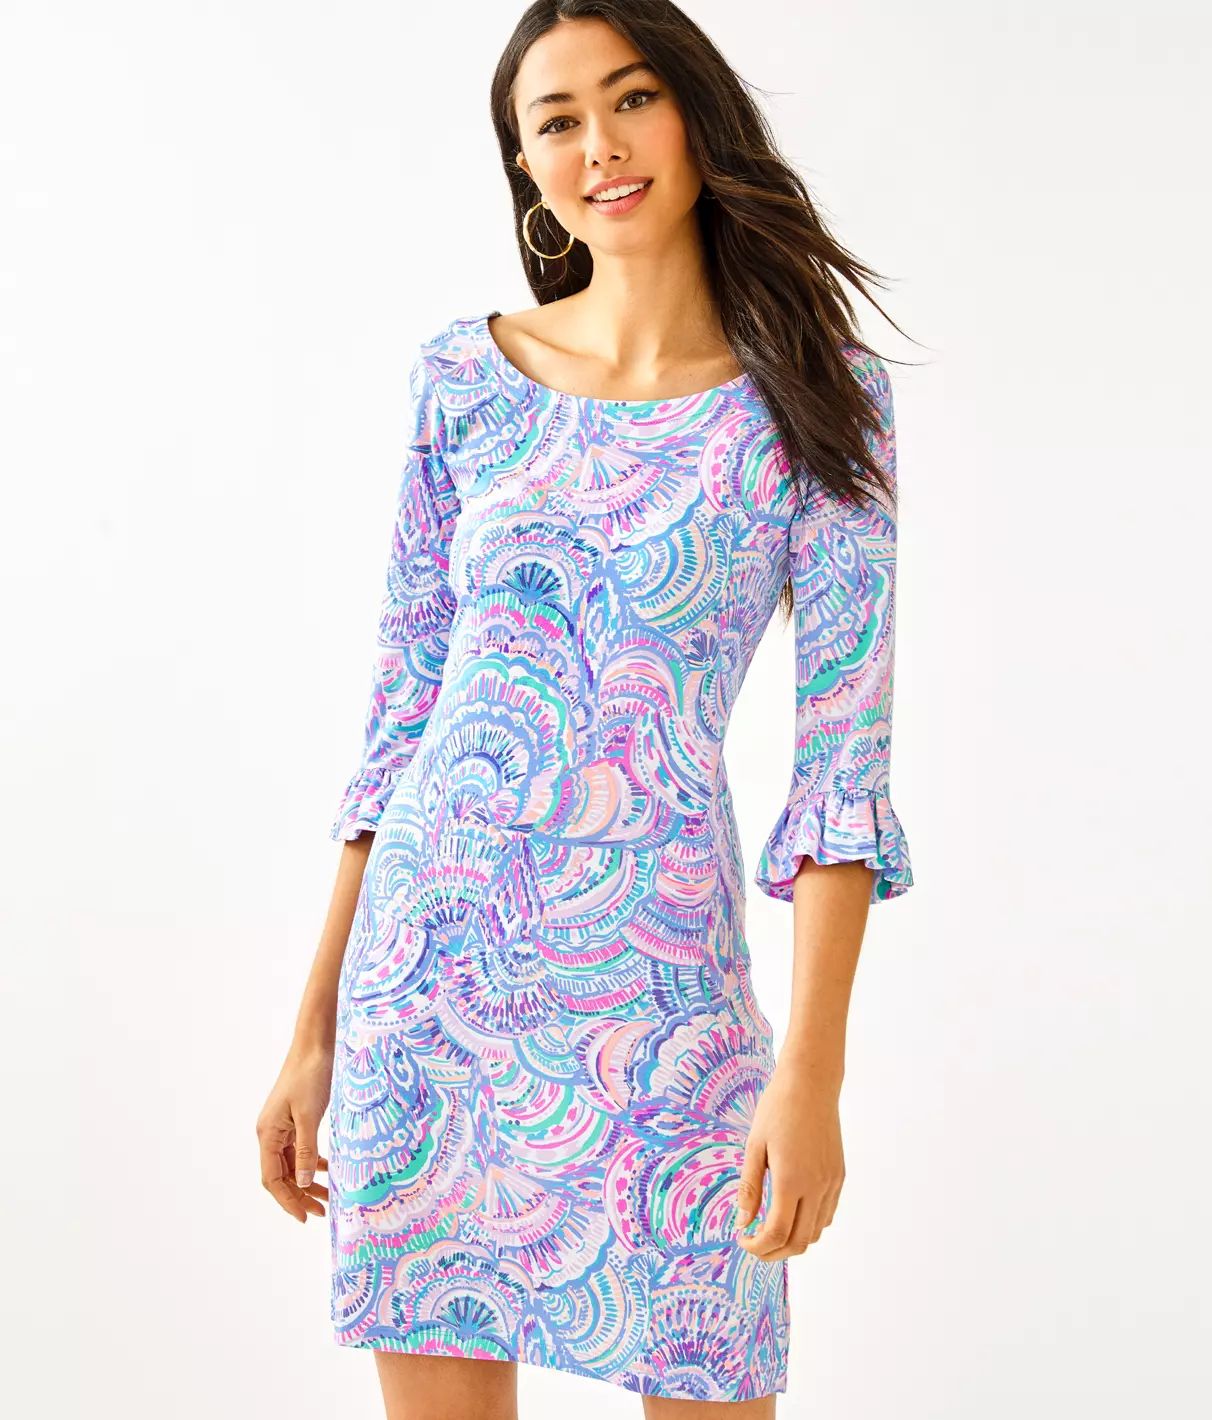 Lilly Pulitzer UPF 50+ Sophie Ruffle Dress | Lilly Pulitzer